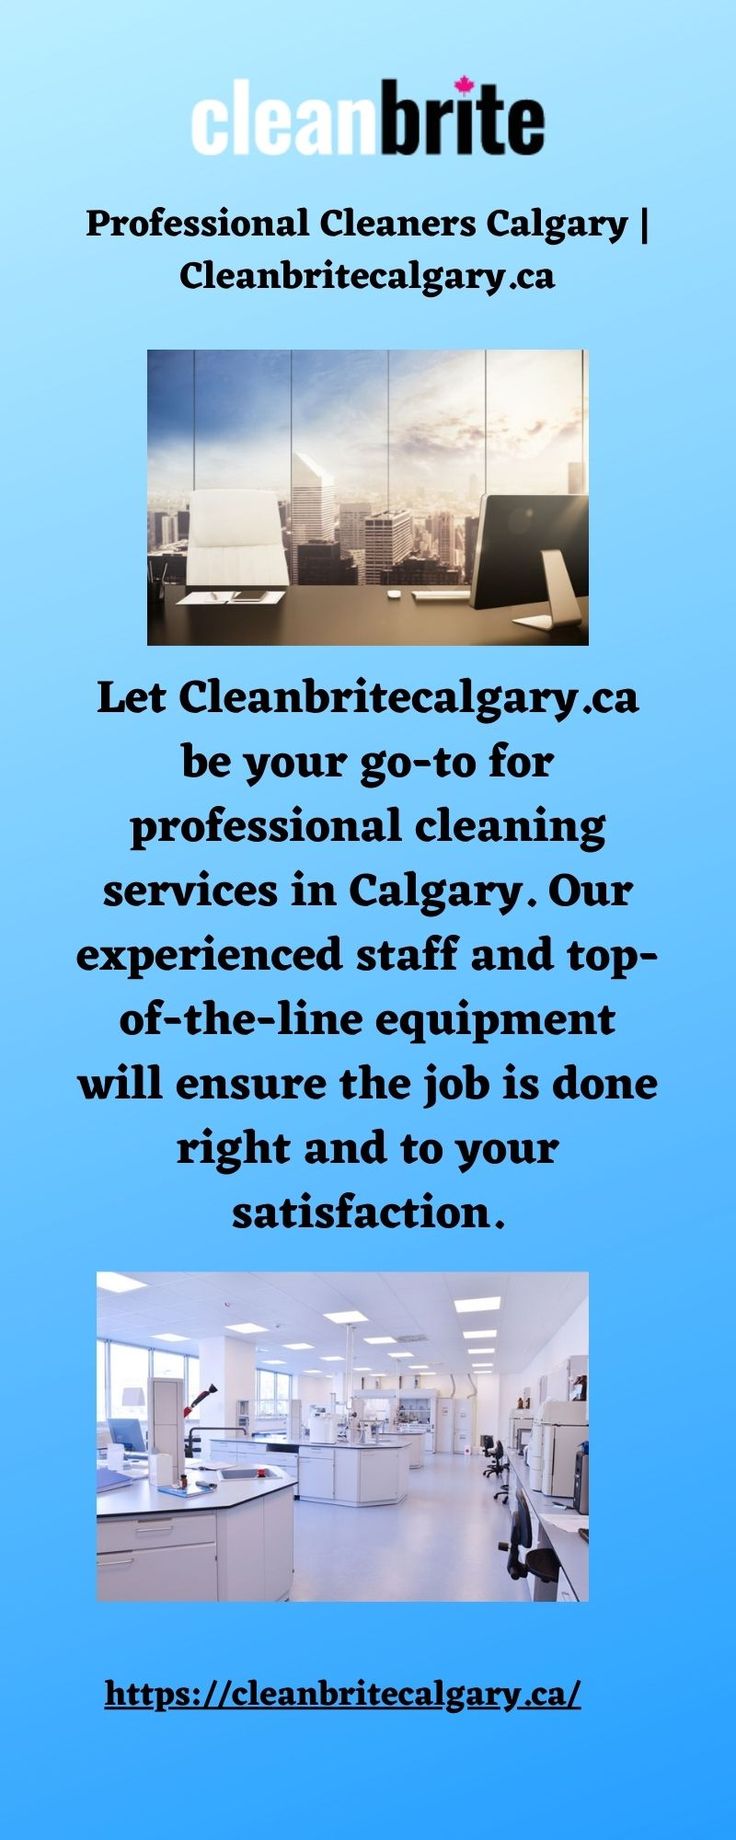 Professional Cleaners Calgary | Cleanbritecalgary.ca in 2023 | Professional cleaning services, Professional cleaners, Professional cleaning